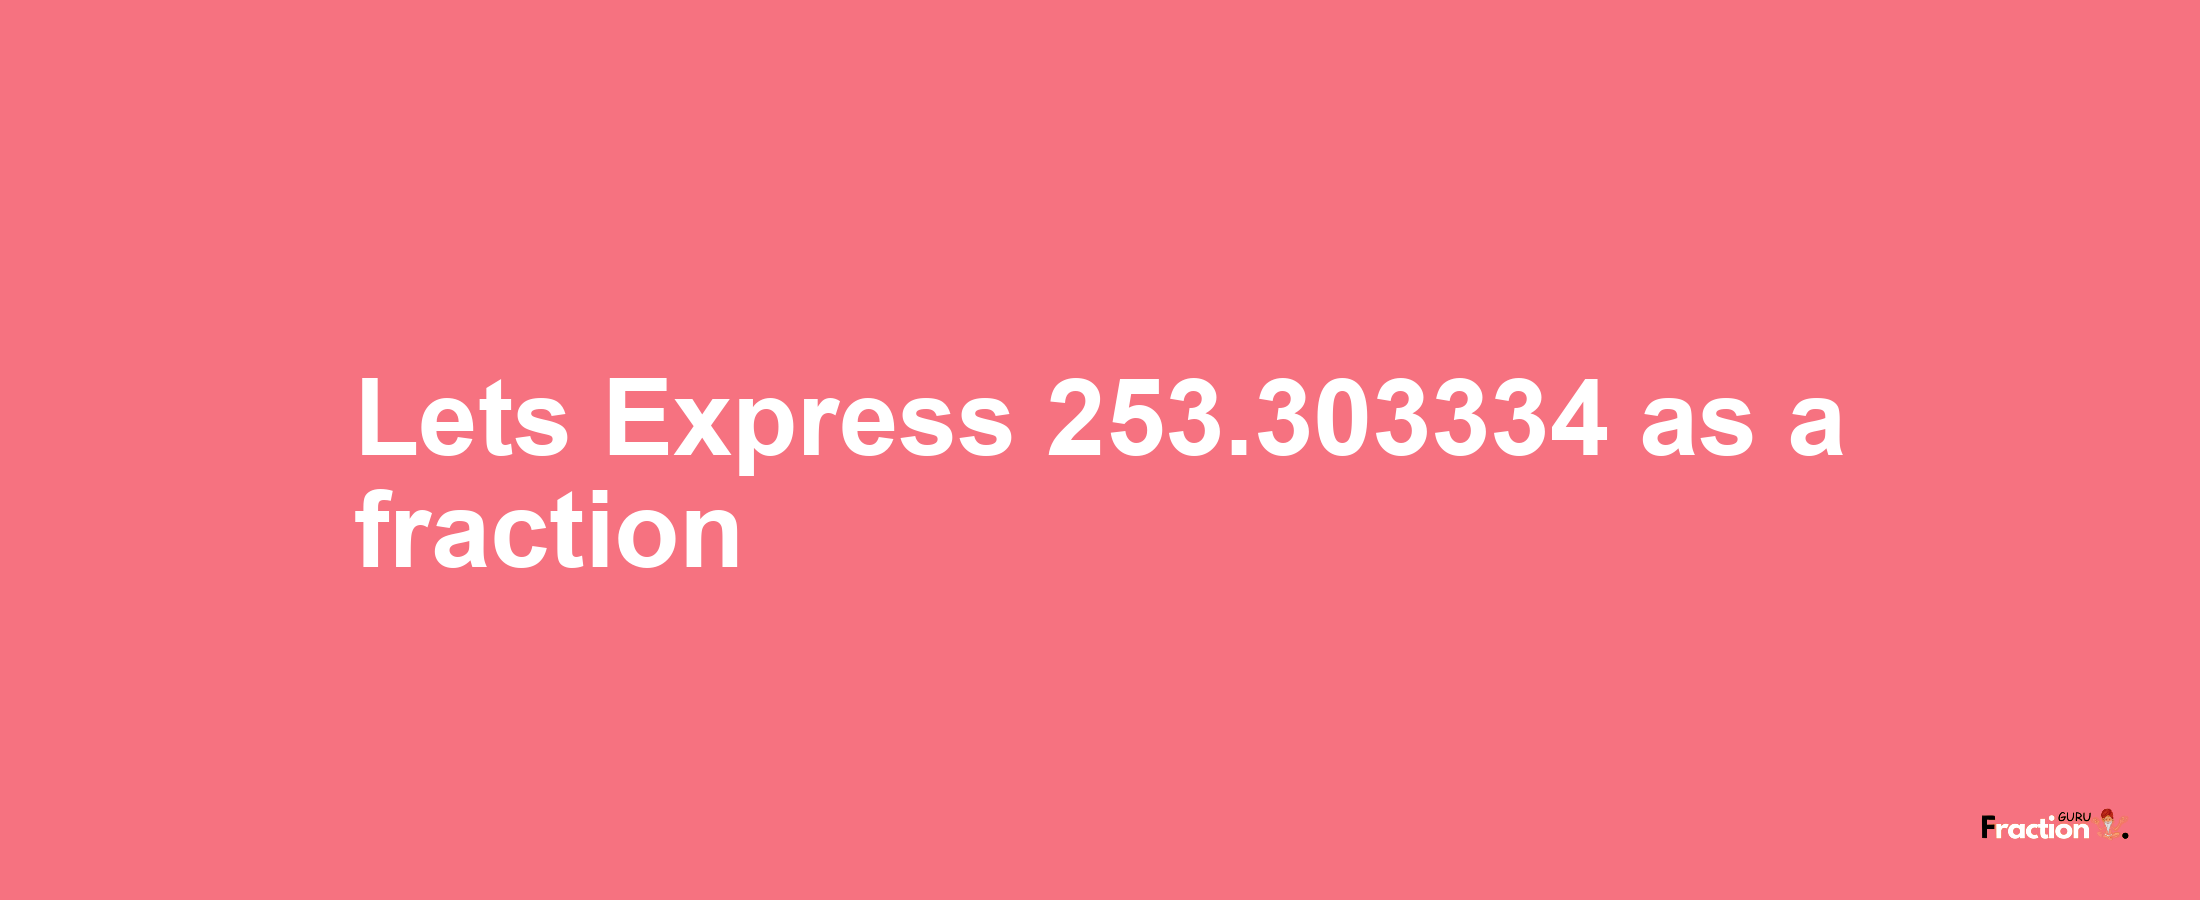 Lets Express 253.303334 as afraction